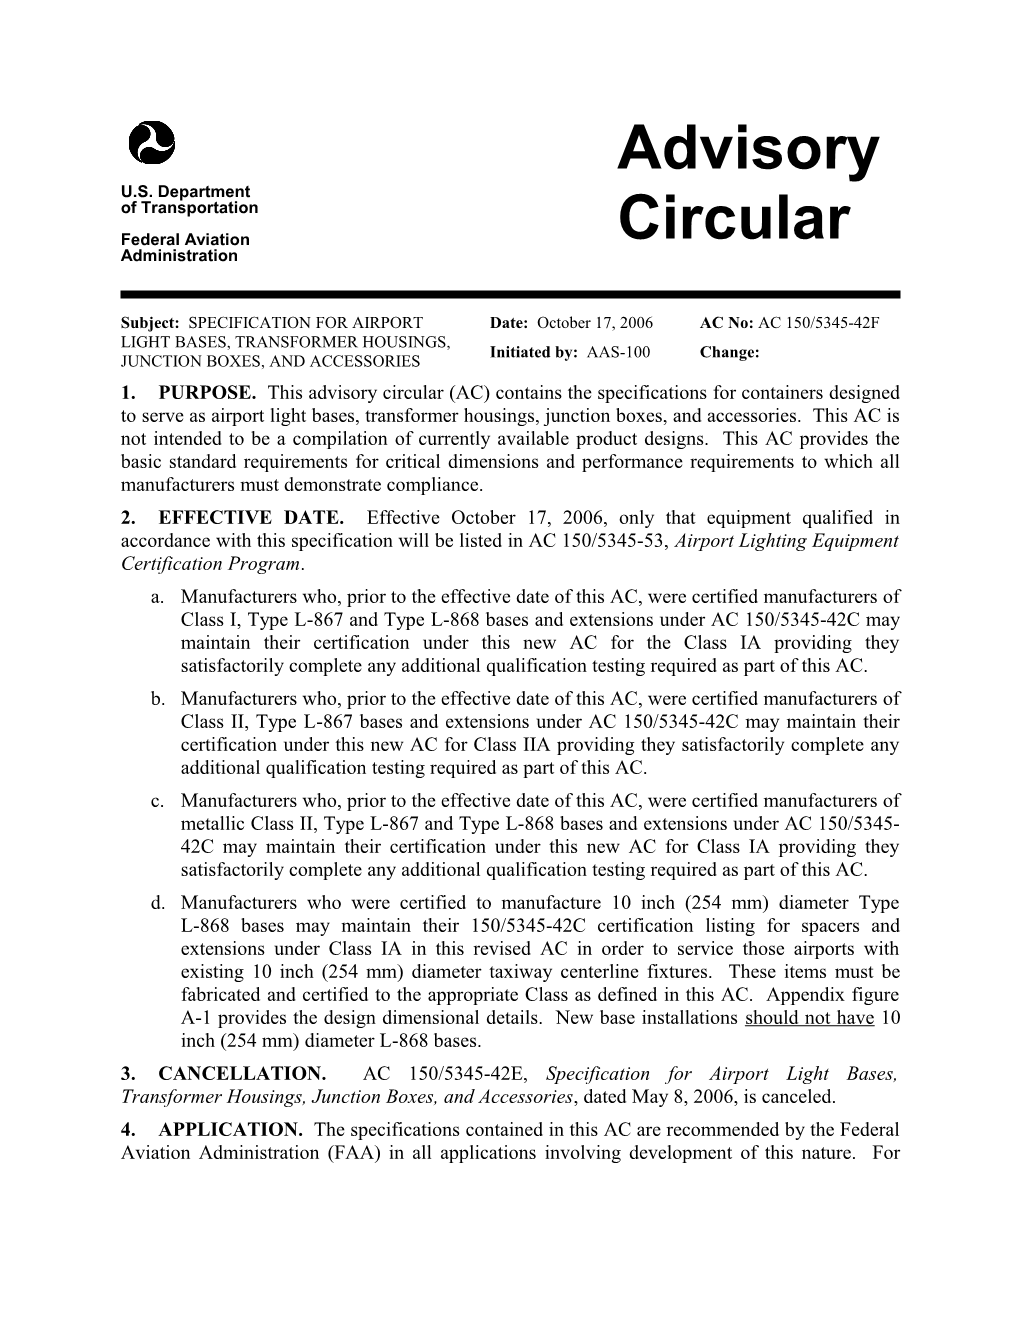 1.PURPOSE. This Advisory Circular (AC) Contains the Specifications for Containers Designed